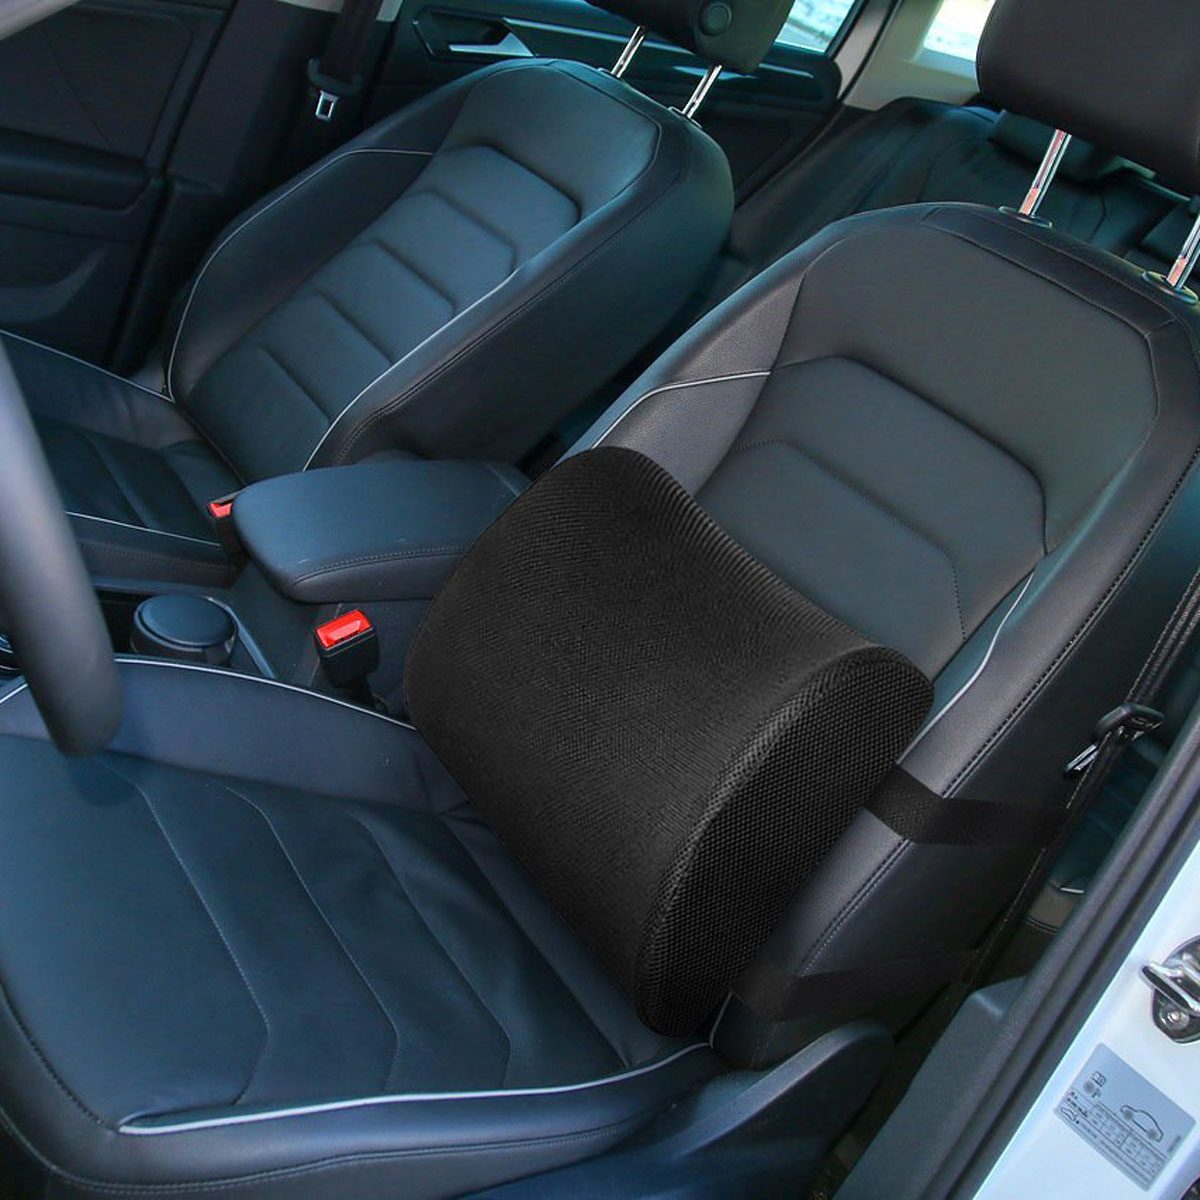 8 Ways to Increase Your Driving Comfort